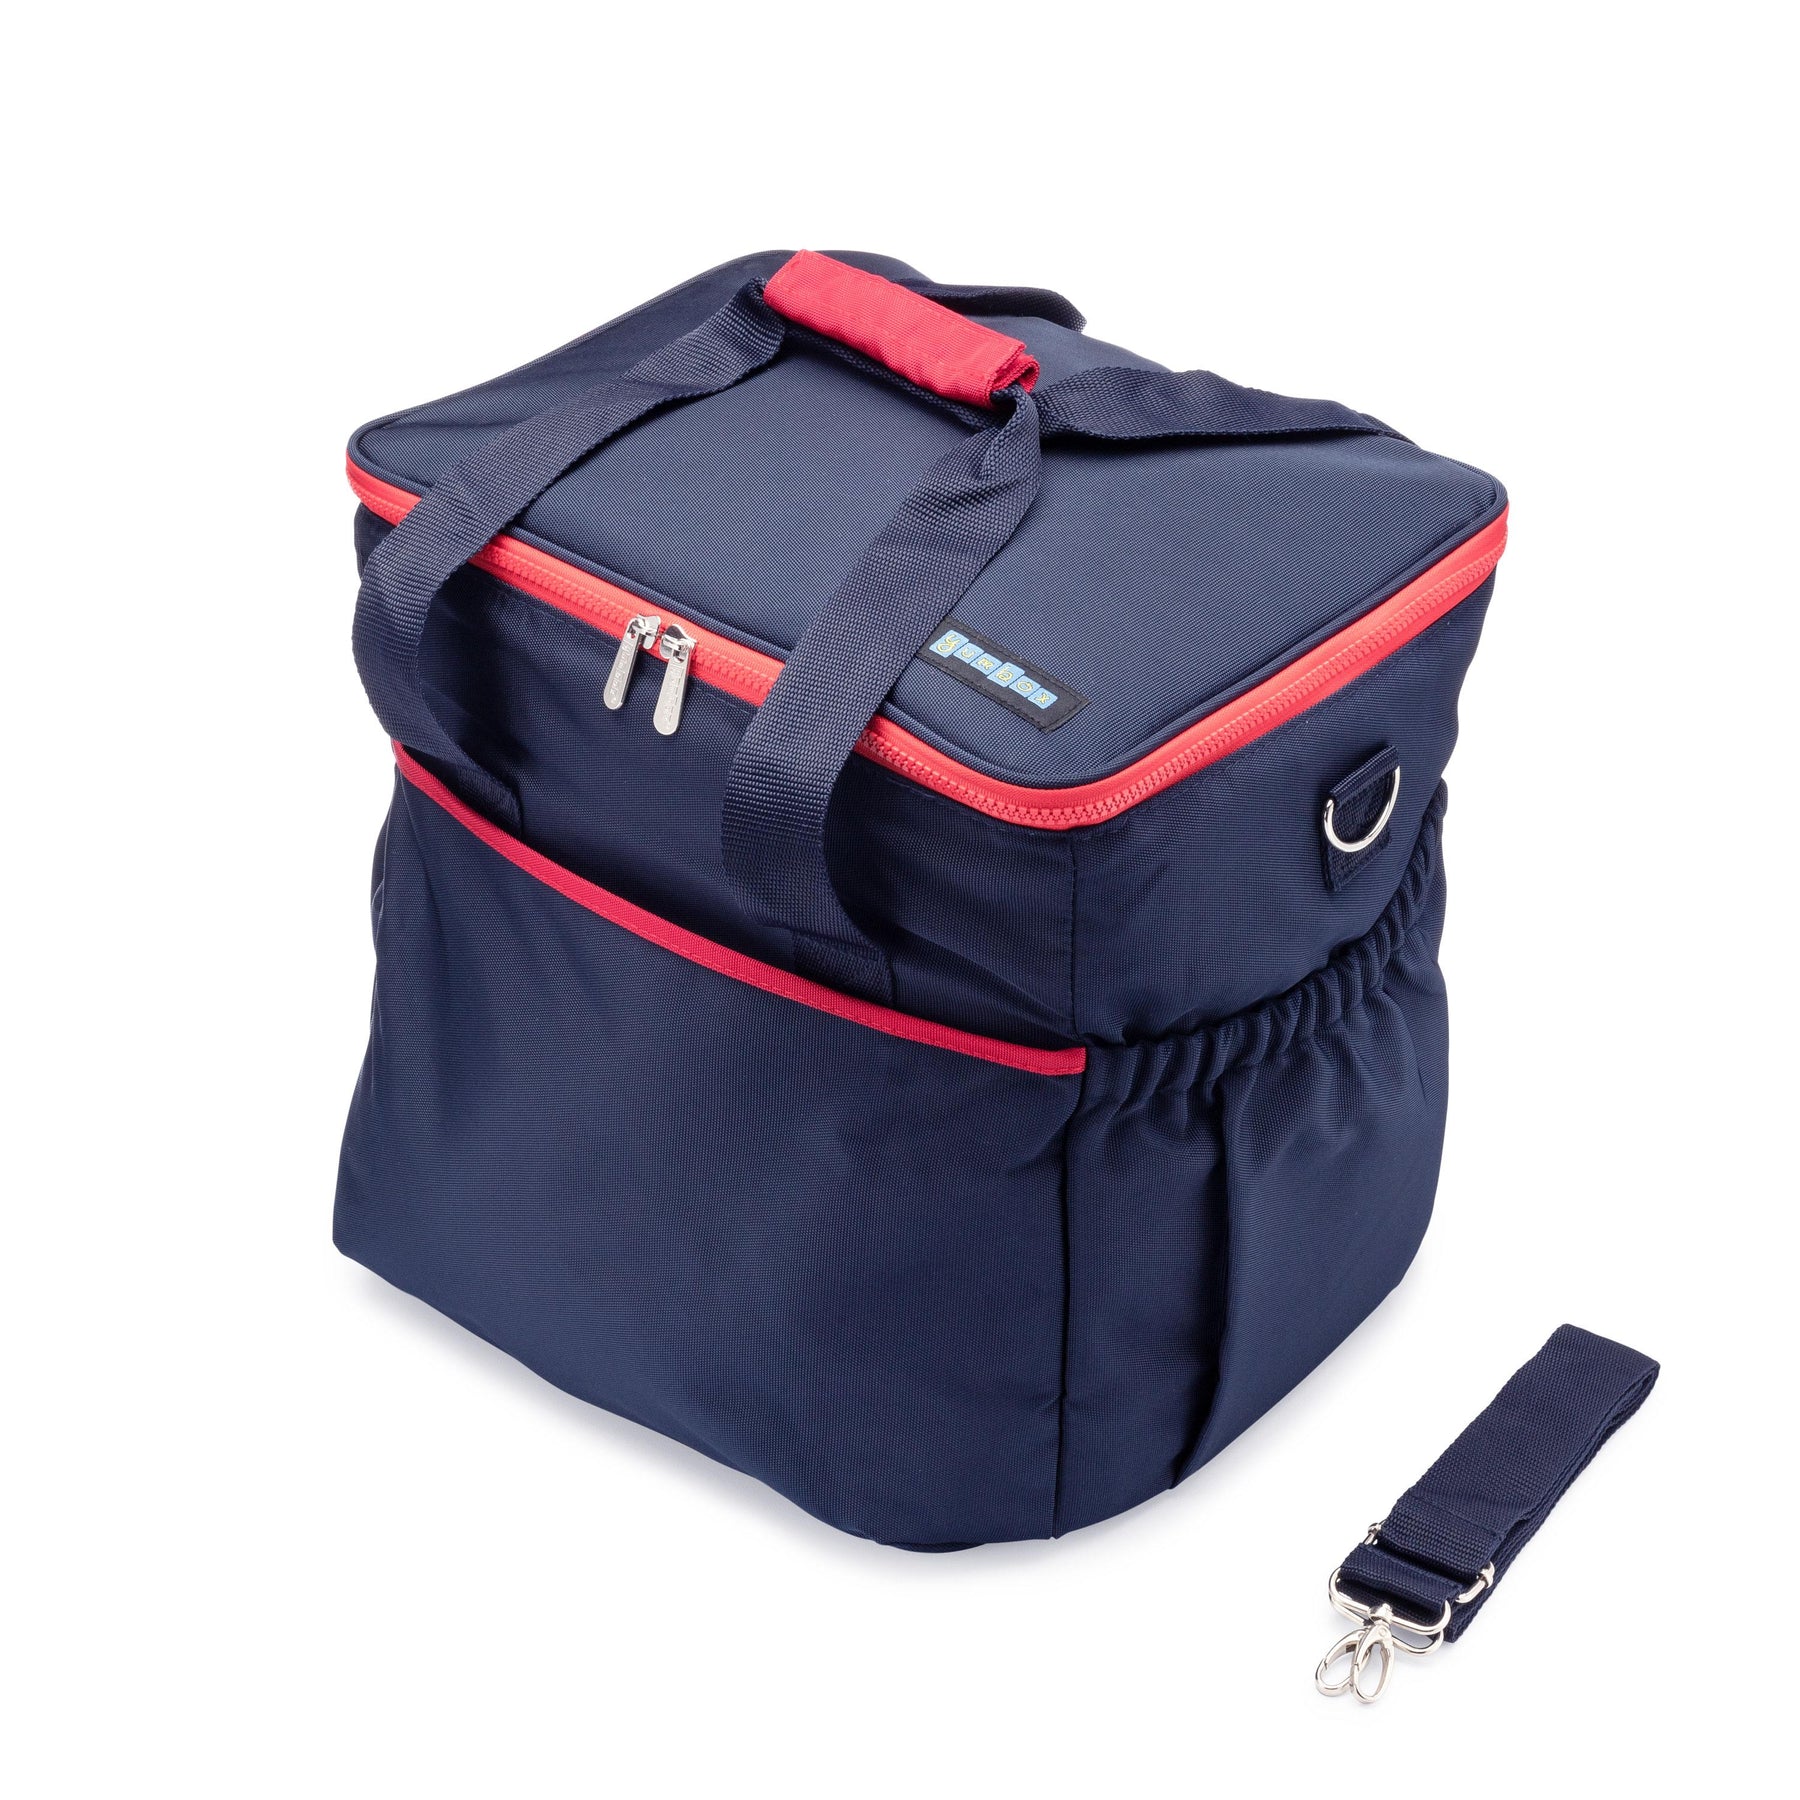 20-40L Cooler Bag Large Capacity Insulated Leakproof Picnic